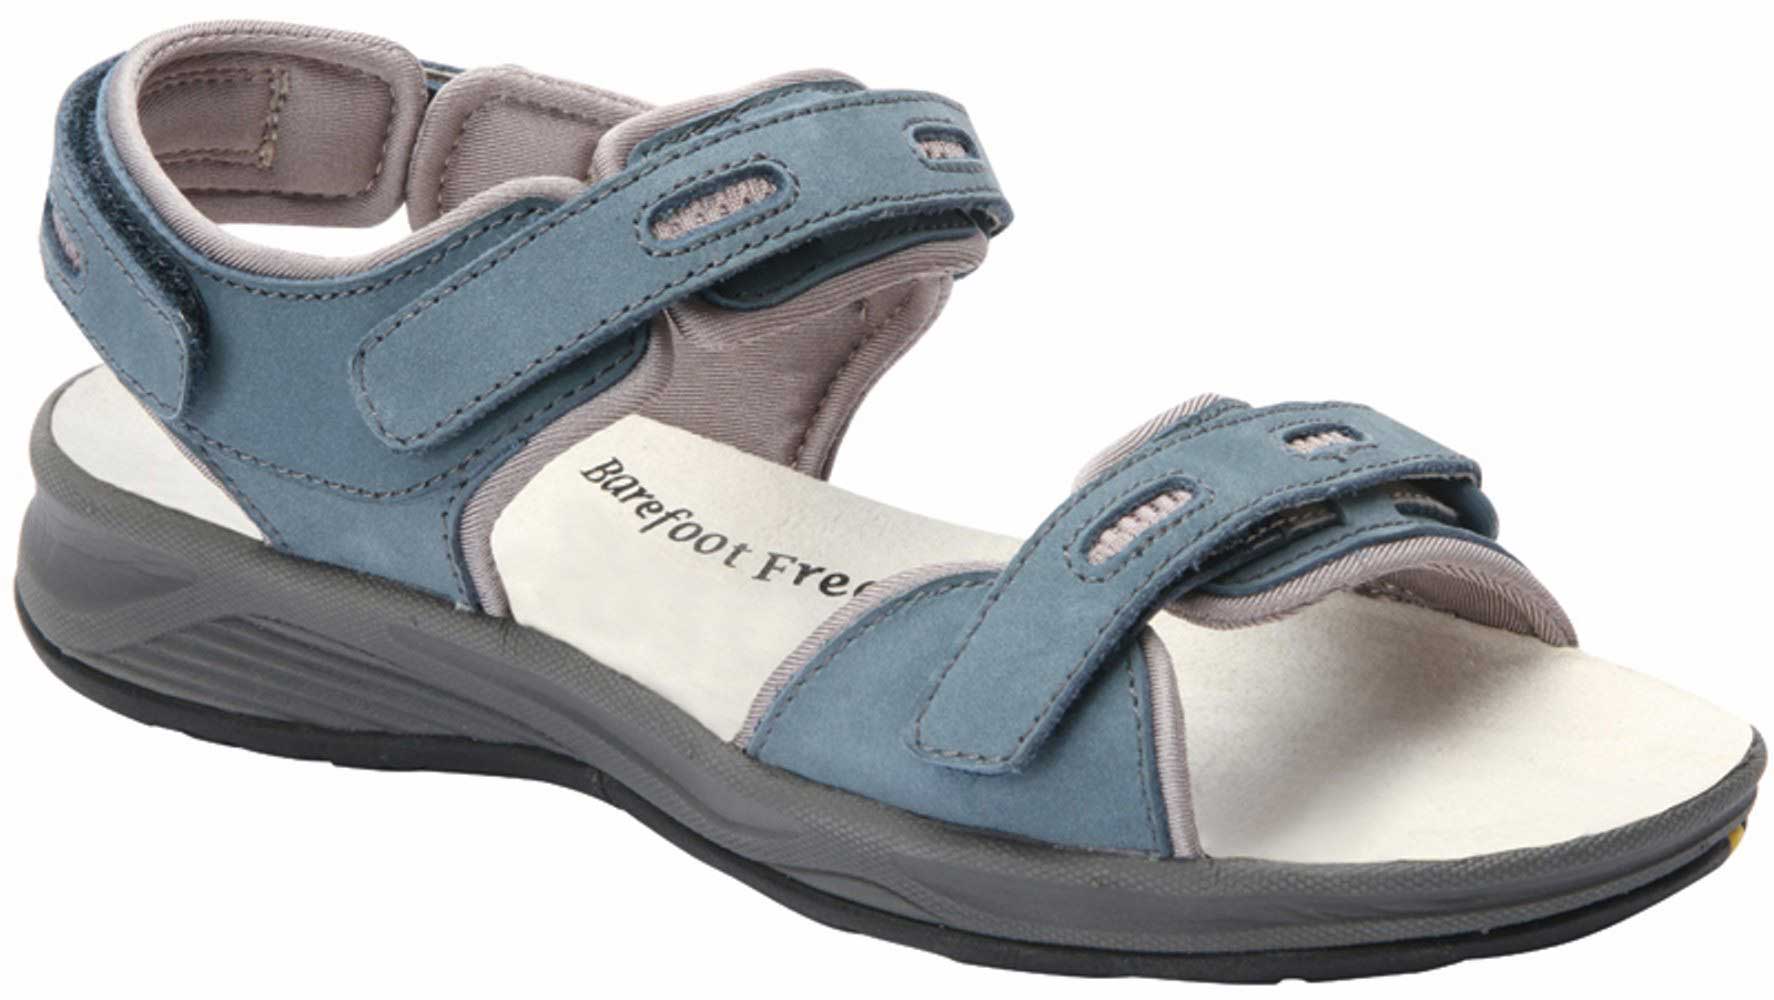 Drew Shoes Cascade 17051 Women's Casual Comfort Therapeutic Sandal - Extra Wide - Extra Depth